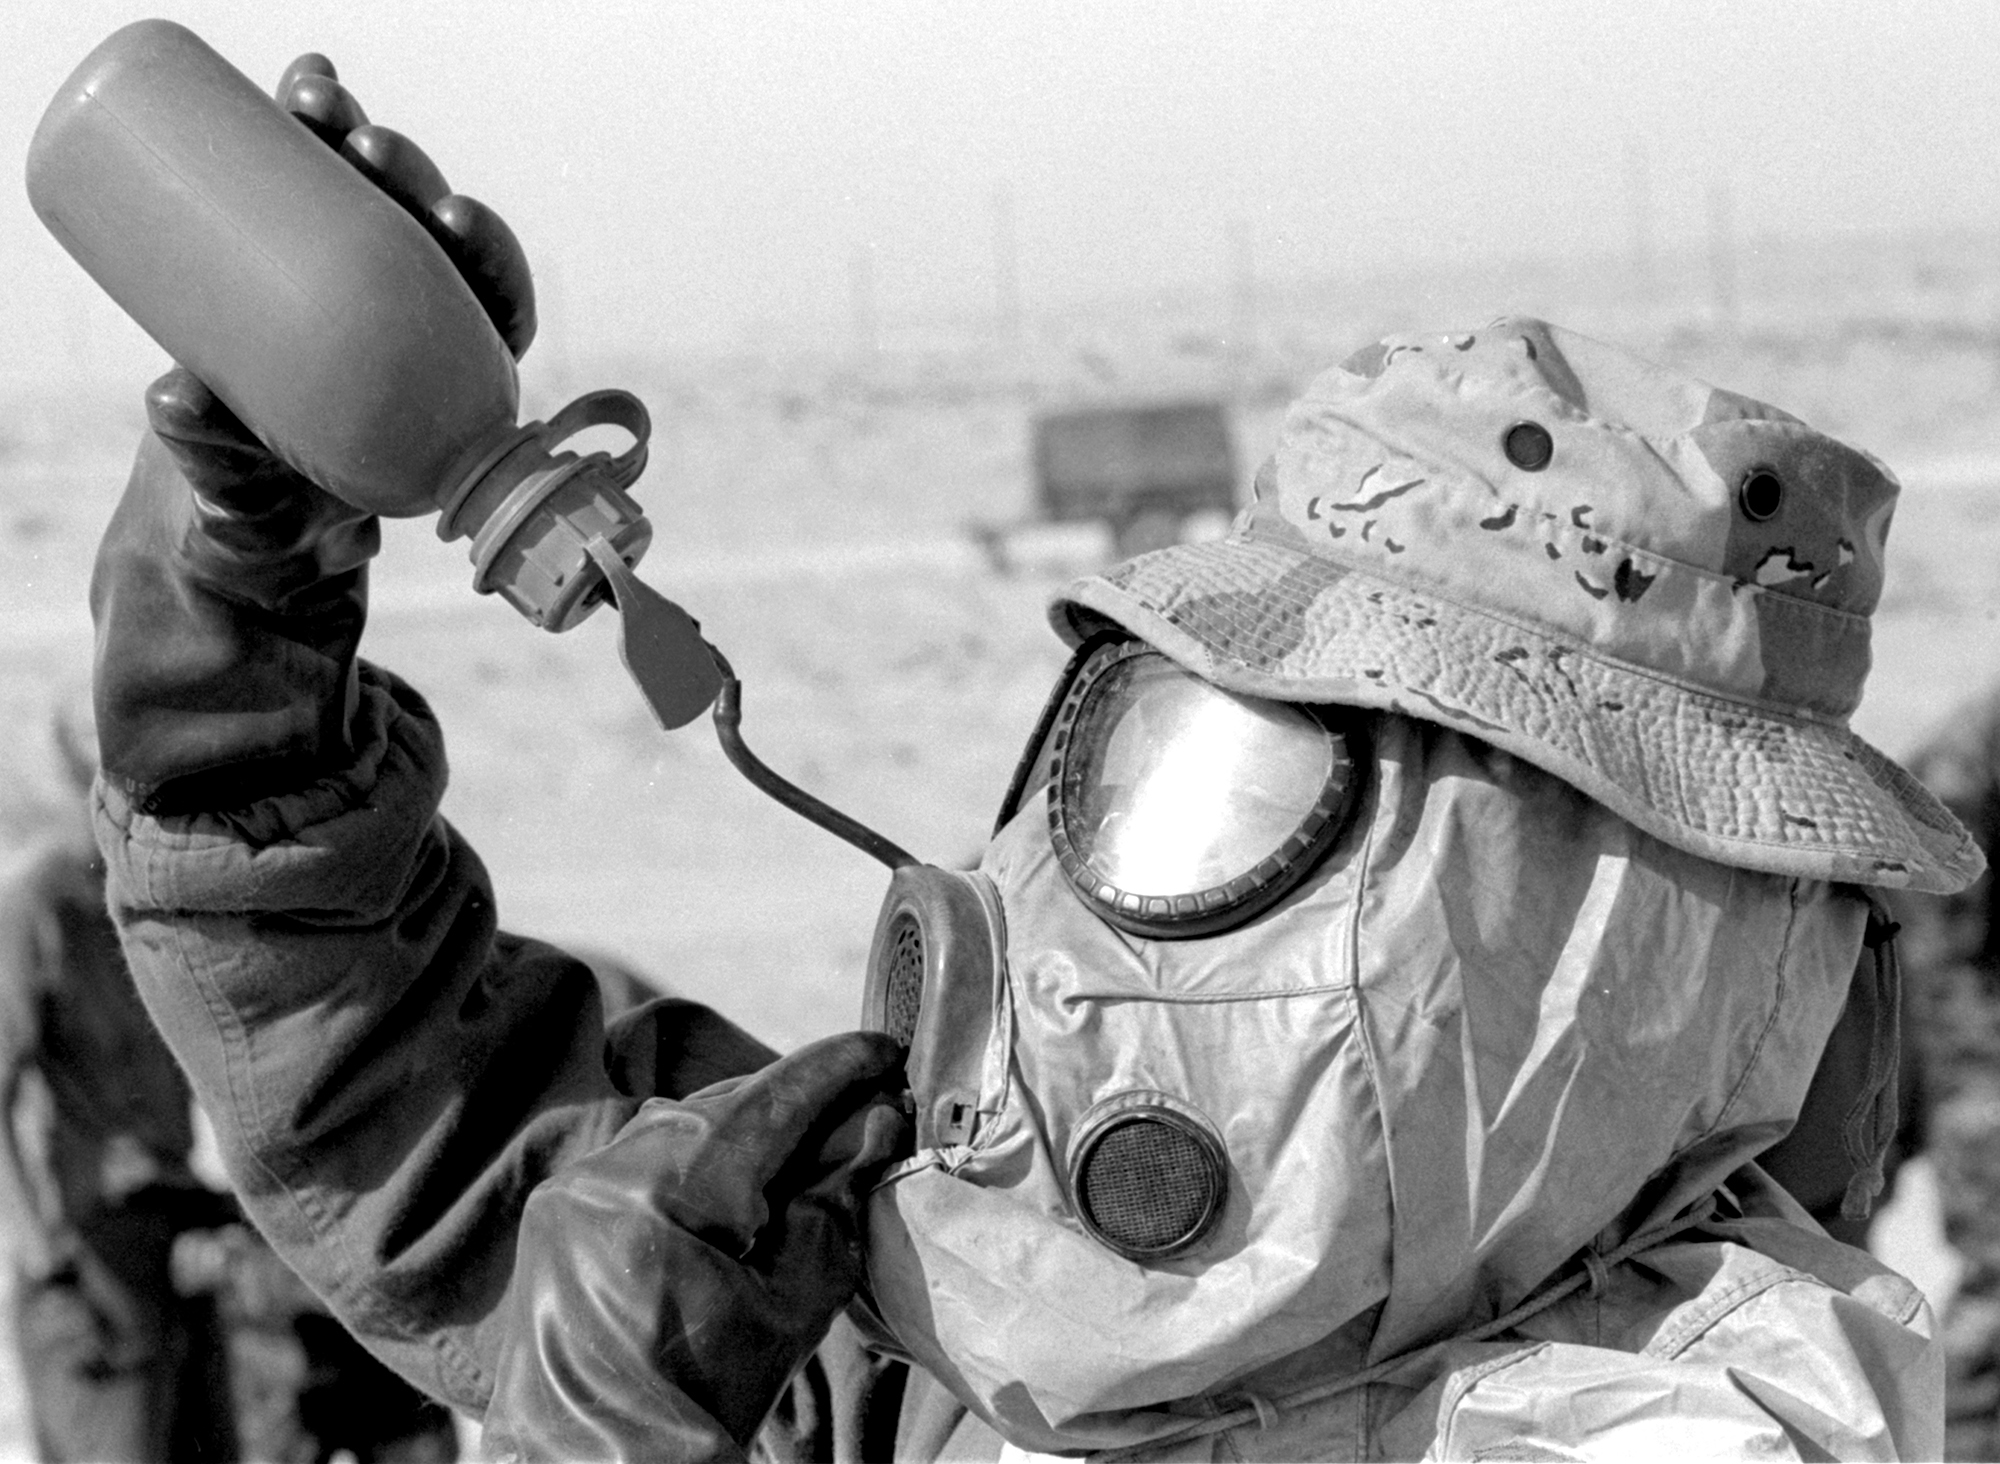 A U.S. Marine taking part in a chemical decontamination exercise in the weeks before the Gulf War gets some relief from the heat of his protective gear and the Saudi Arabian desert.